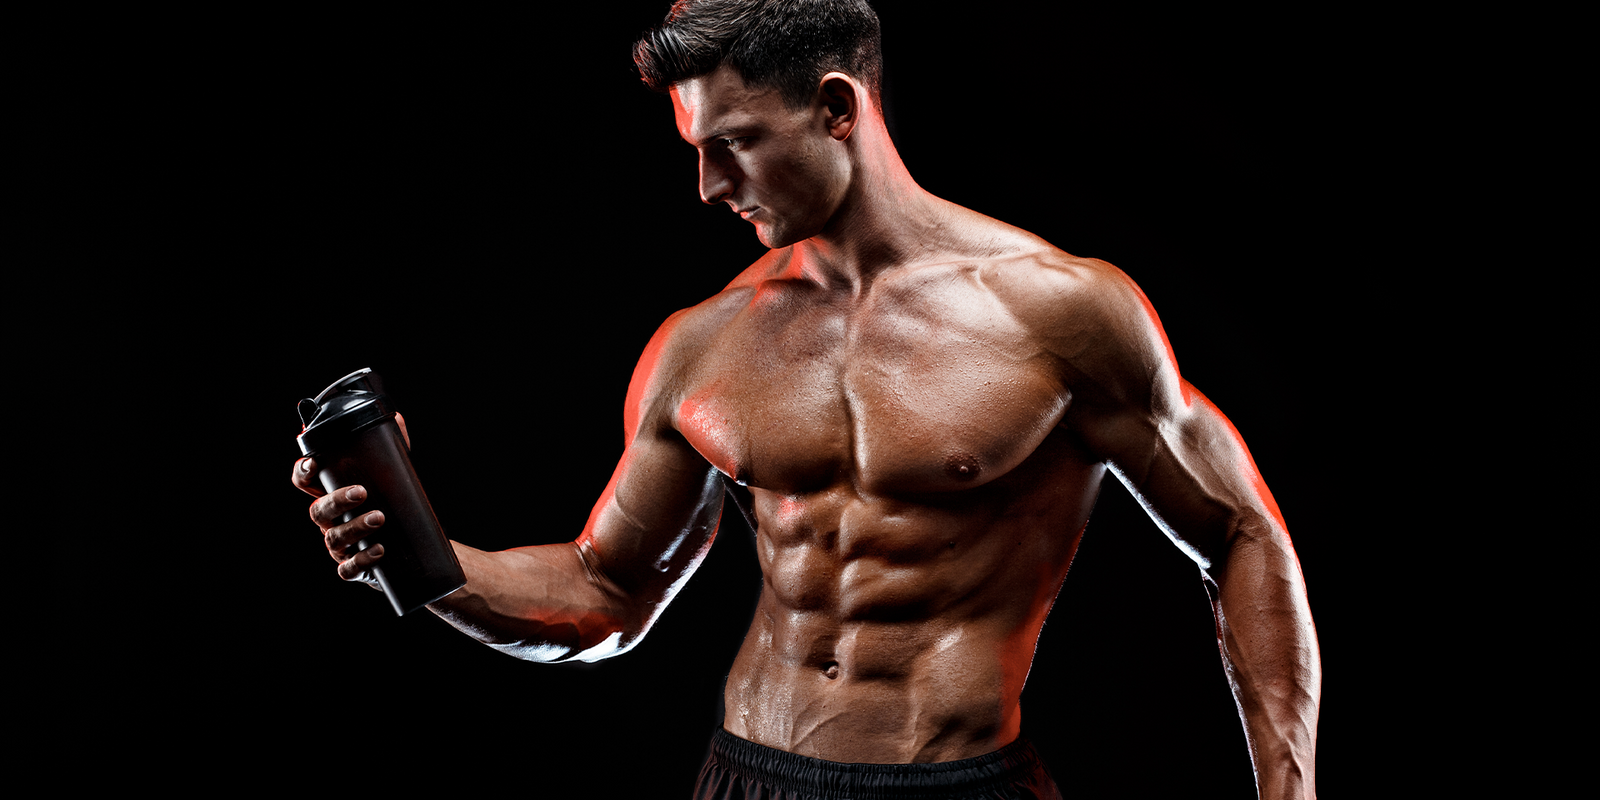 How to plan your muscle building diet